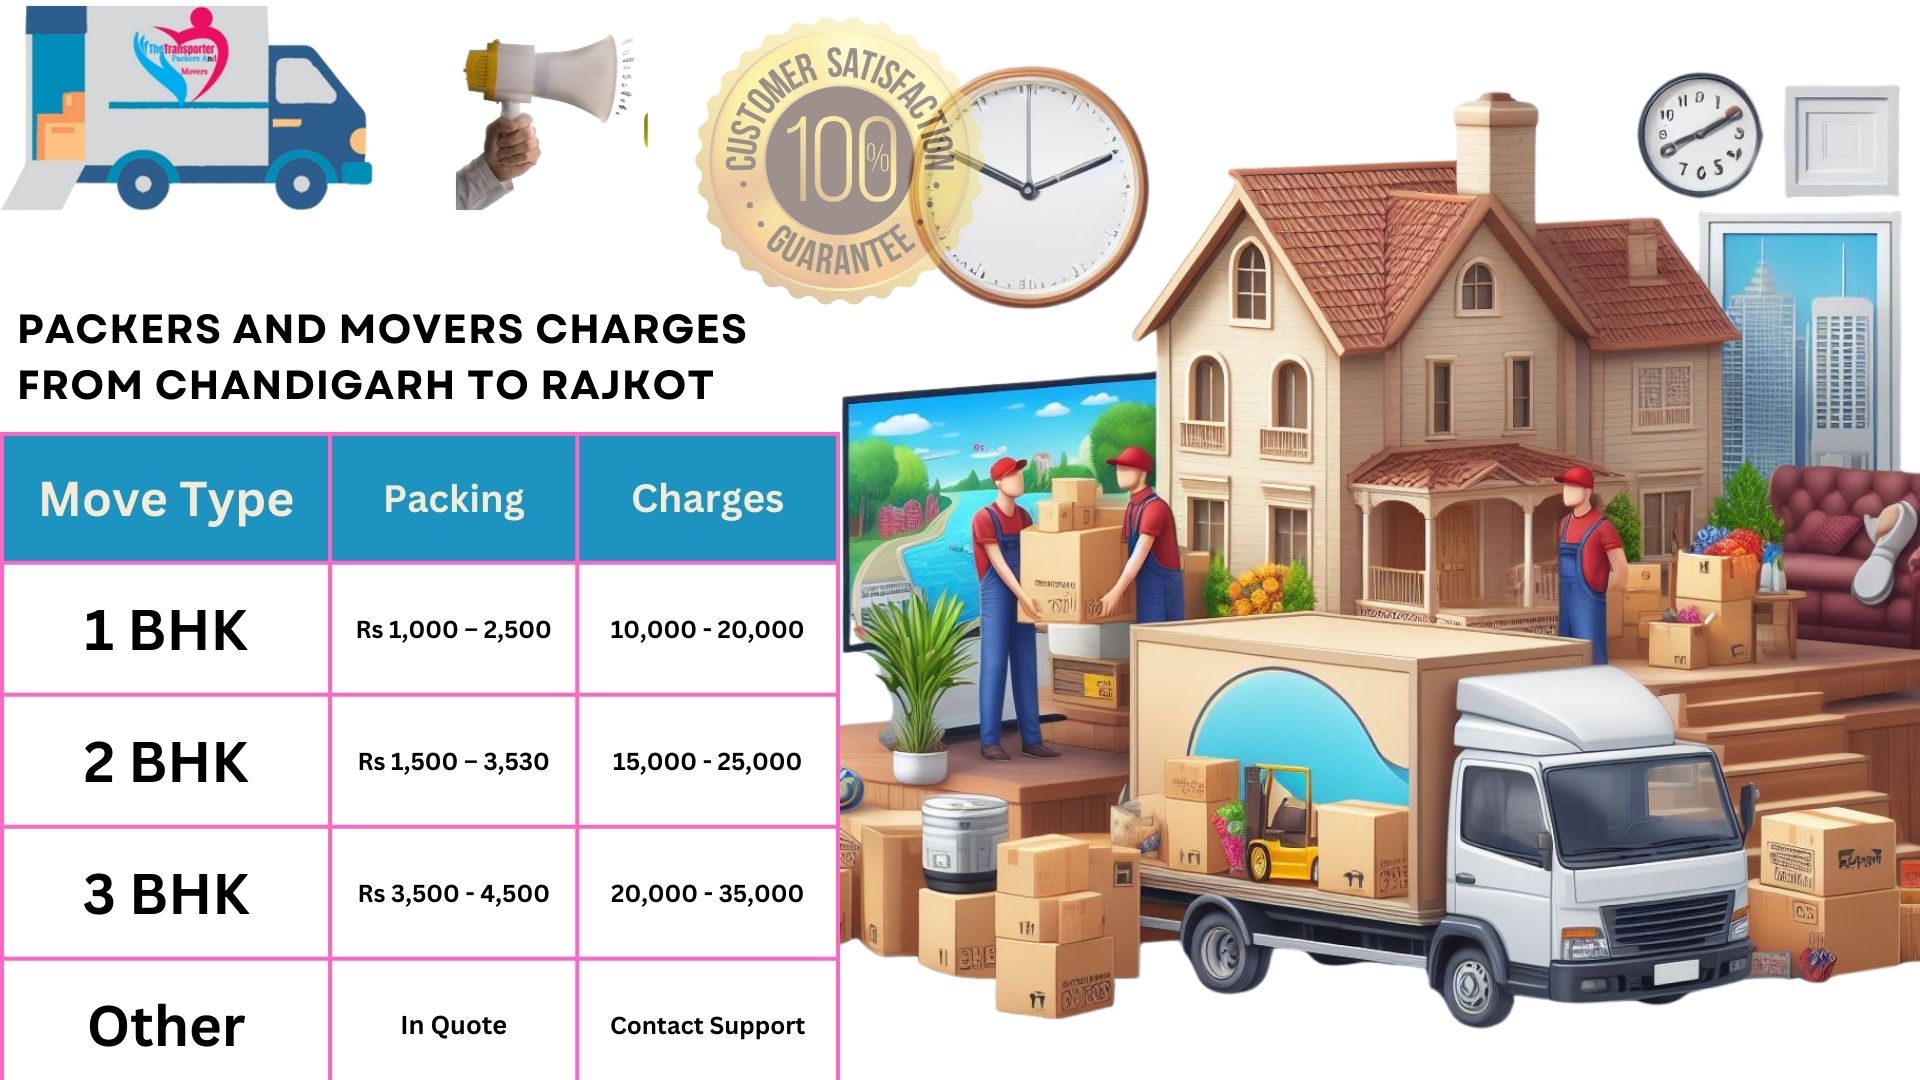 Movers and Packers cost list From Chandigarh to Rajkot